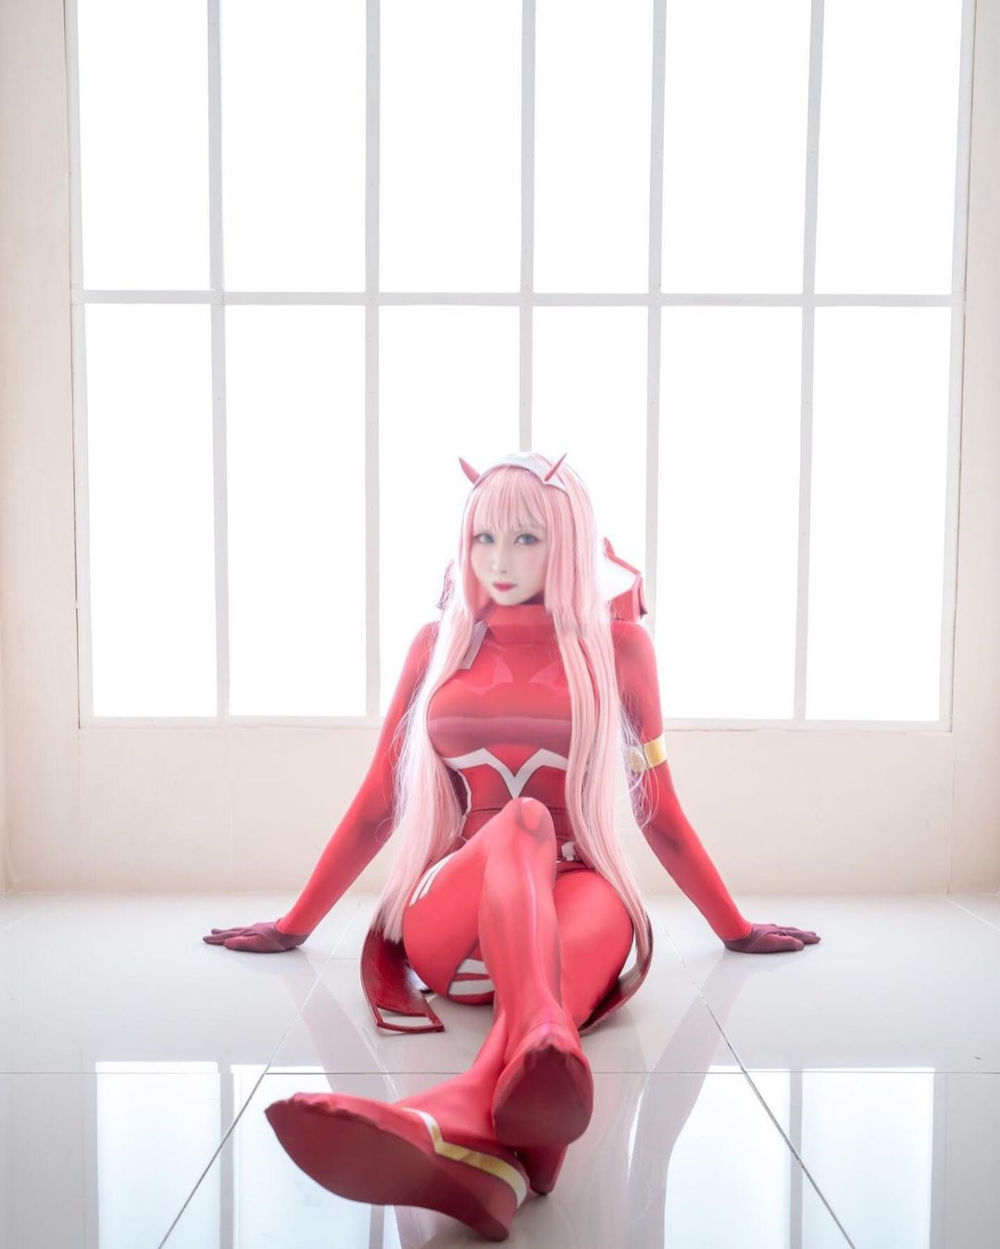 Darling in the Franxx cosplayer jumps into battle as epic Zero Two - Dexerto